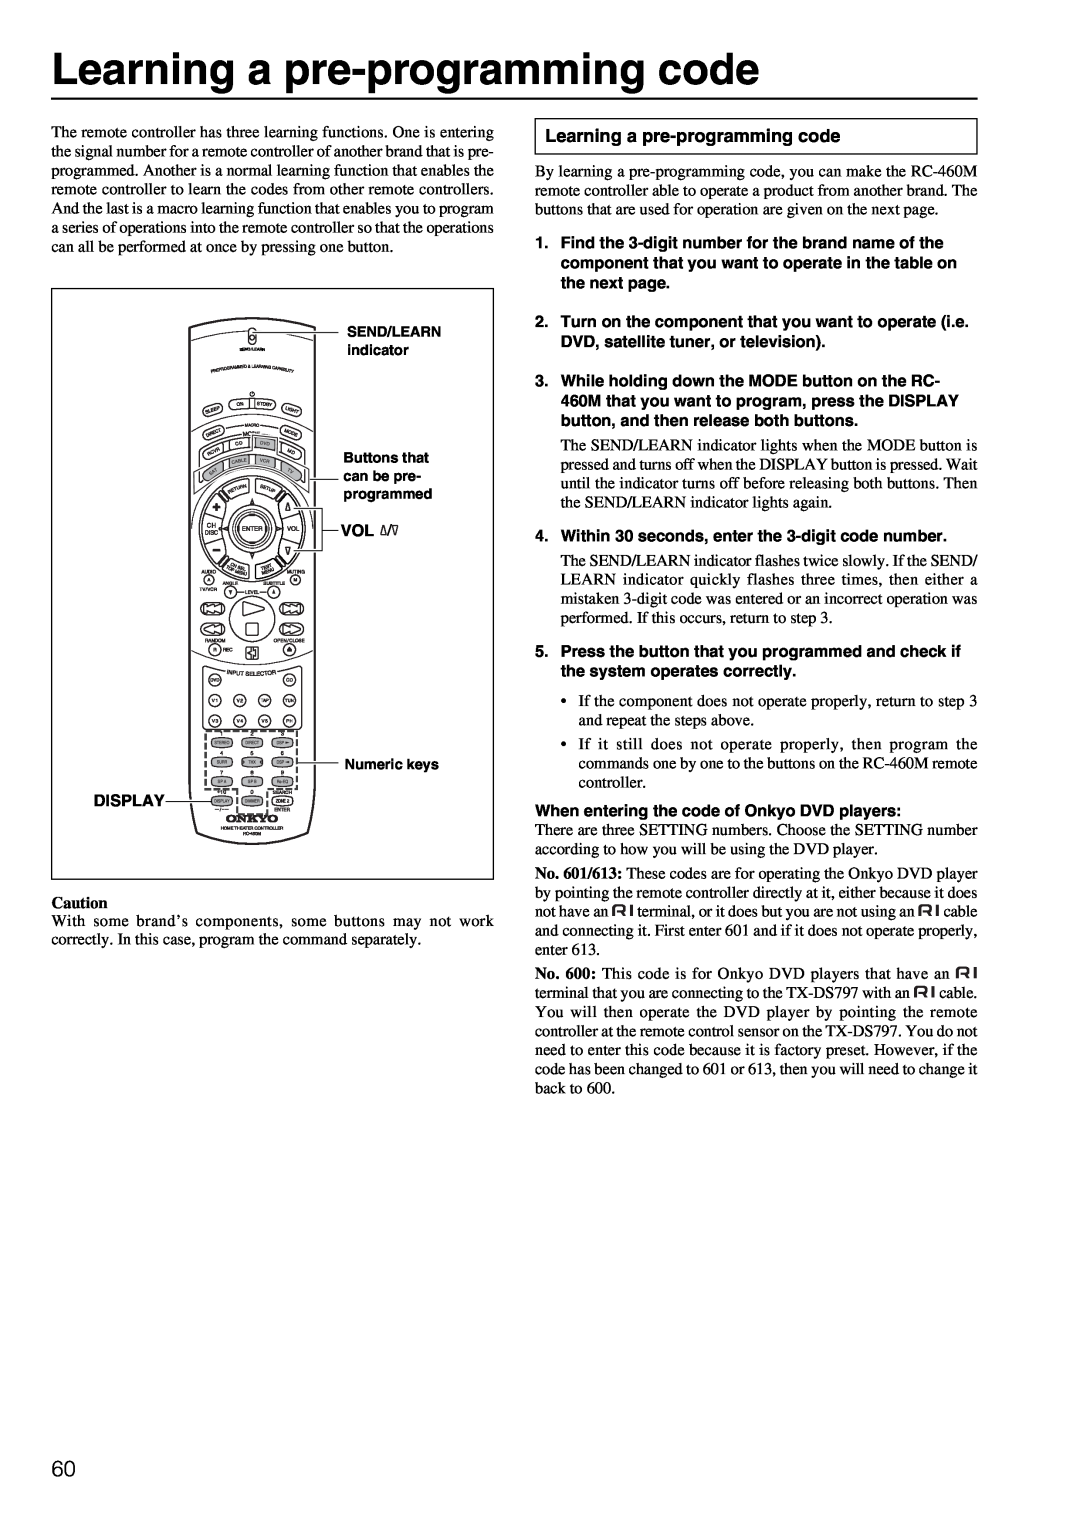 Onkyo TX-DS797 instruction manual Learning a pre-programmingcode 